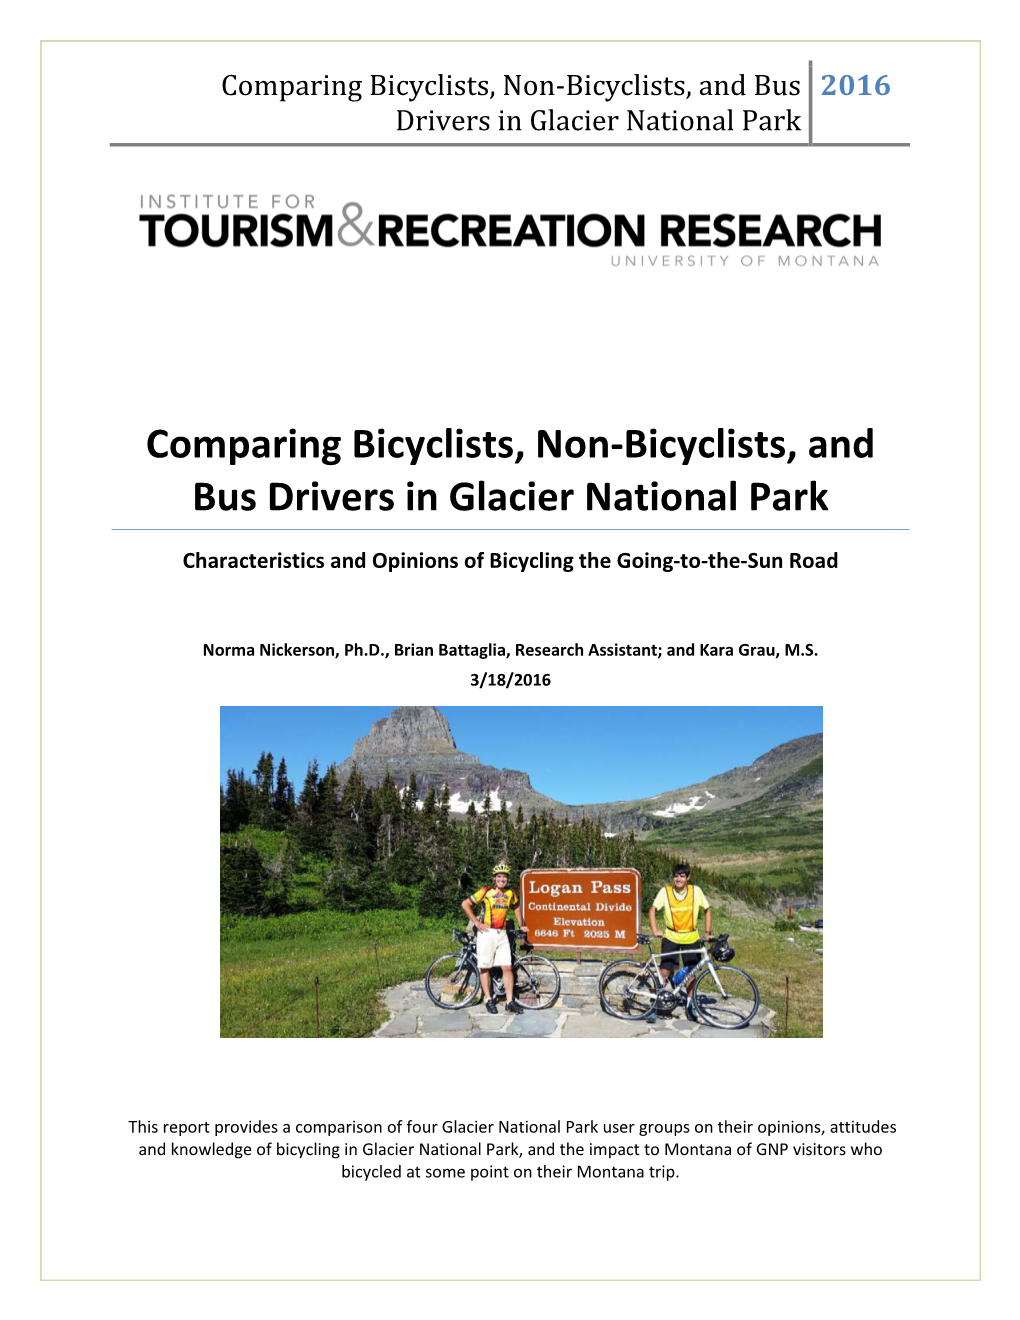 Comparing Bicyclists, Non-Bicyclists, and Bus Drivers in Glacier National Park